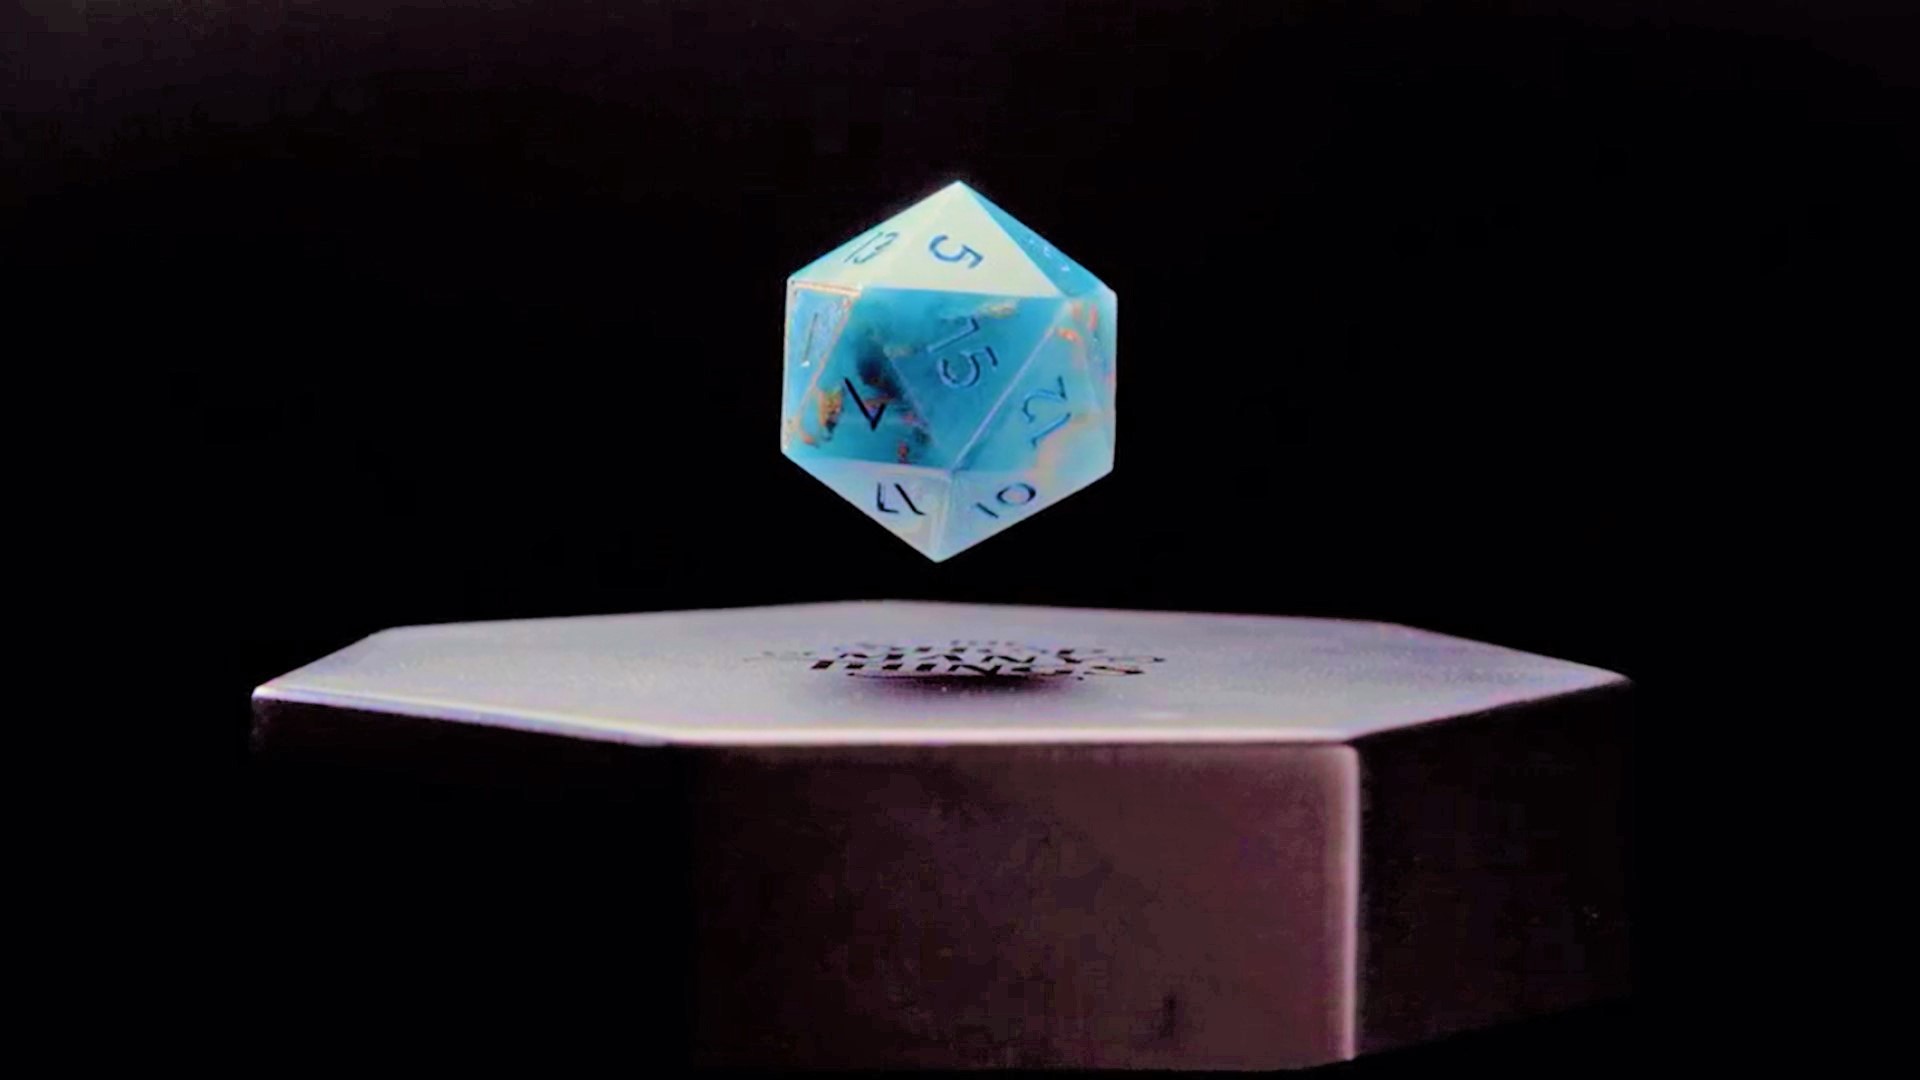 DnD dice rolls not flying? Try a floating D20